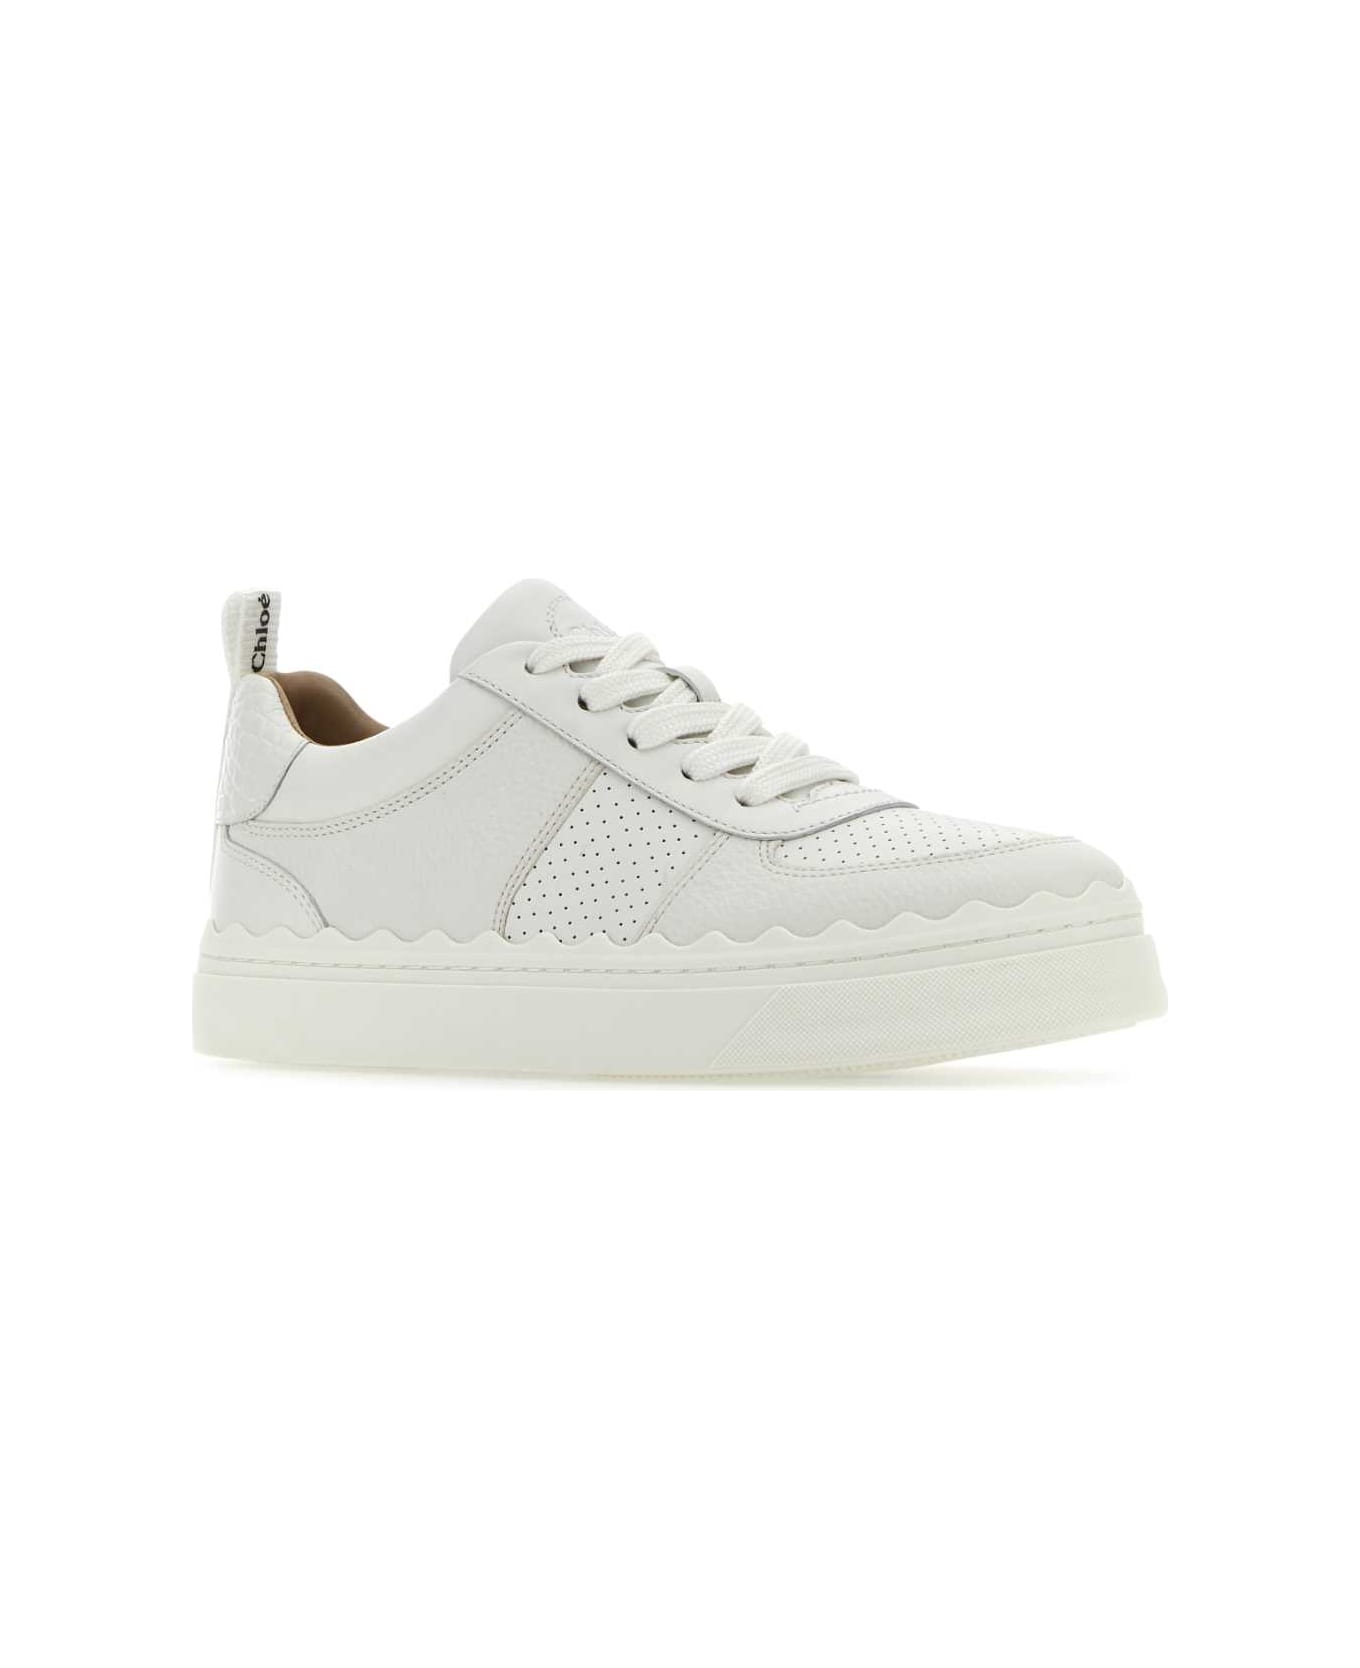 Chloé White Leather Sneakers - WHITE